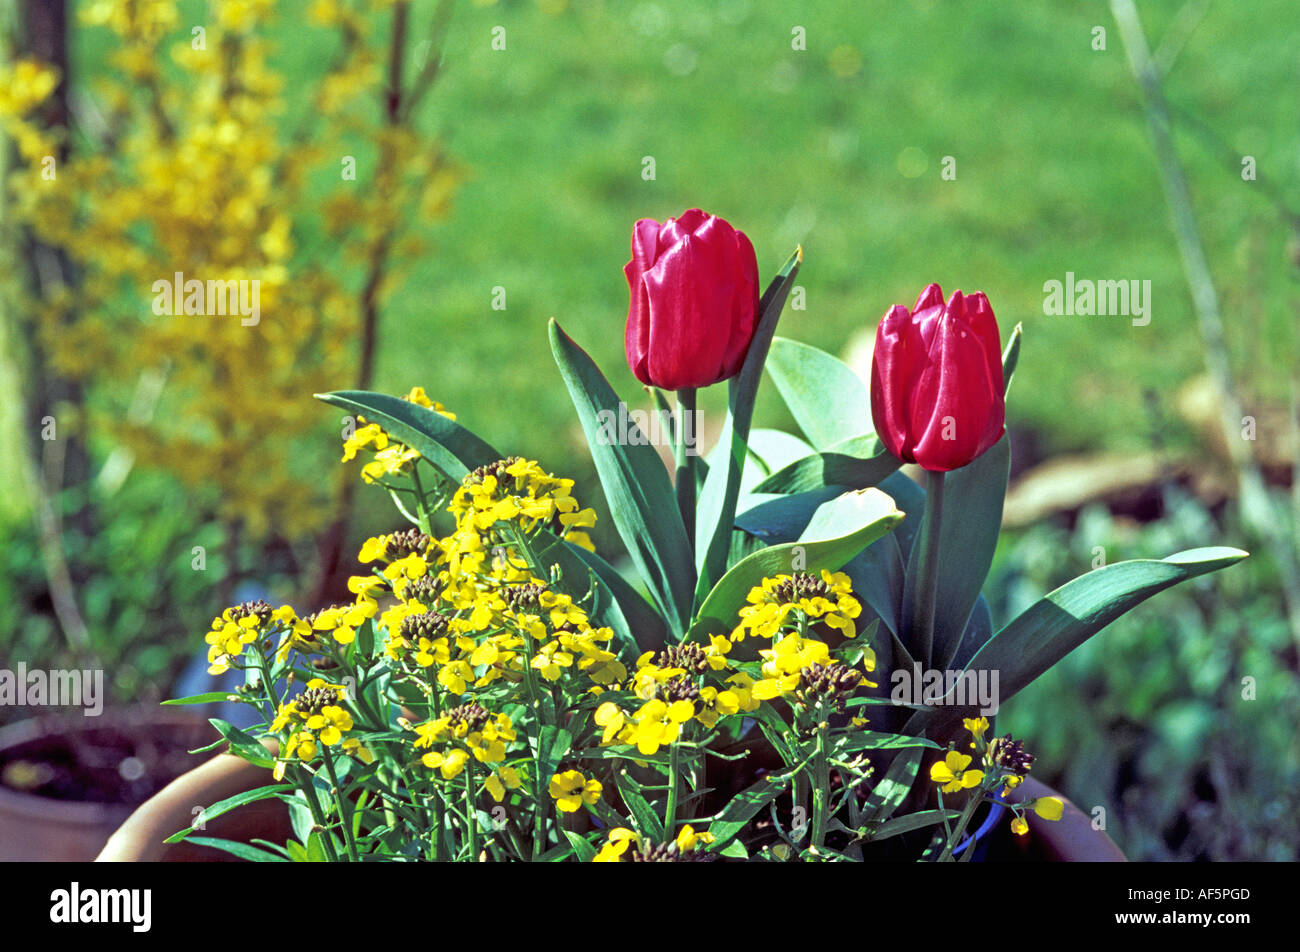 Two red tulips 'Flair' and yellow erysimum flowers in a country spring garden Stock Photo